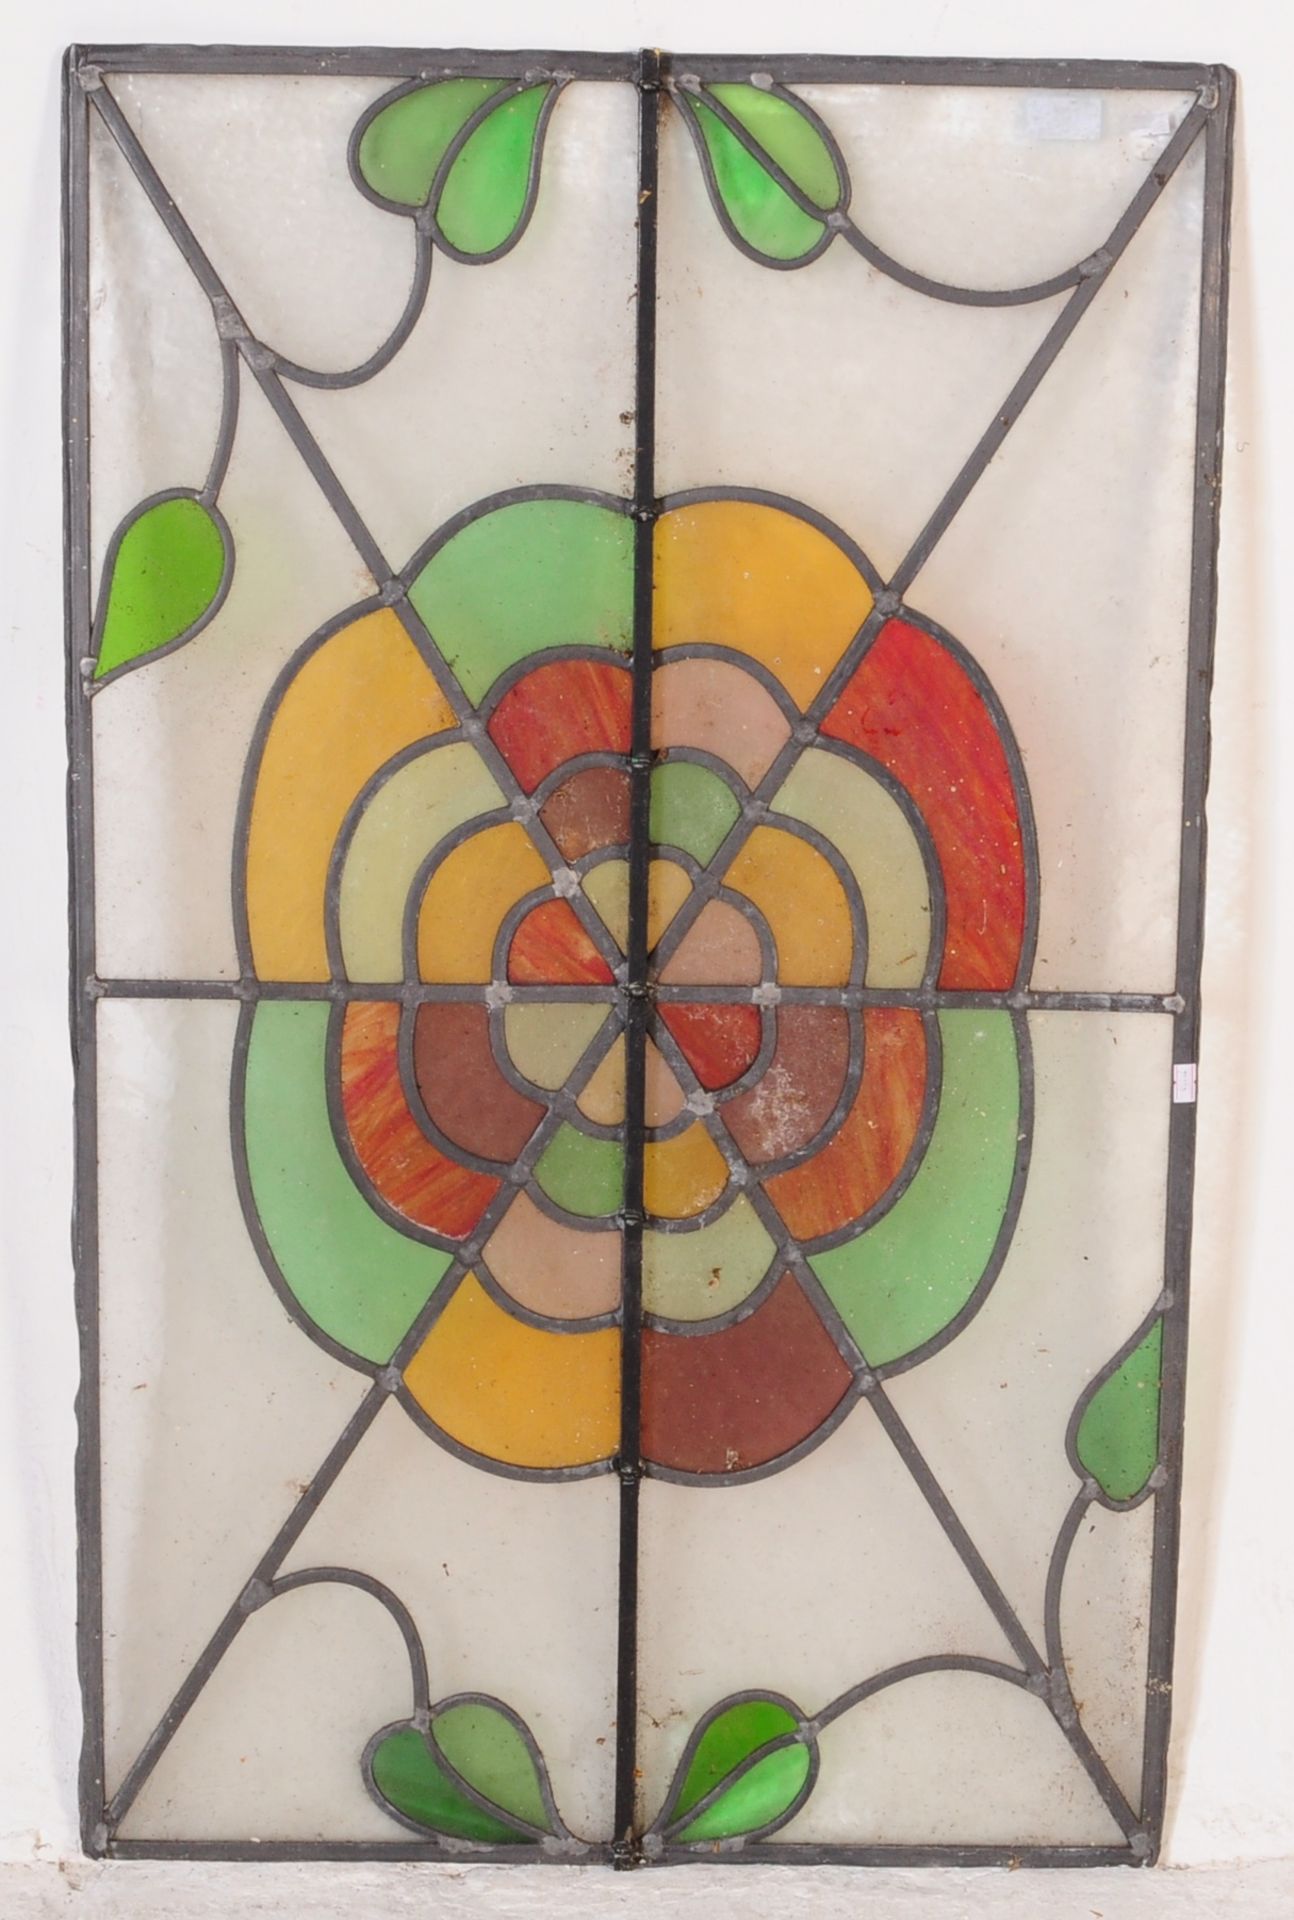 19TH CENTURY STAINED GLASS WINDOW WITH CENTRAL CREST - Image 4 of 5